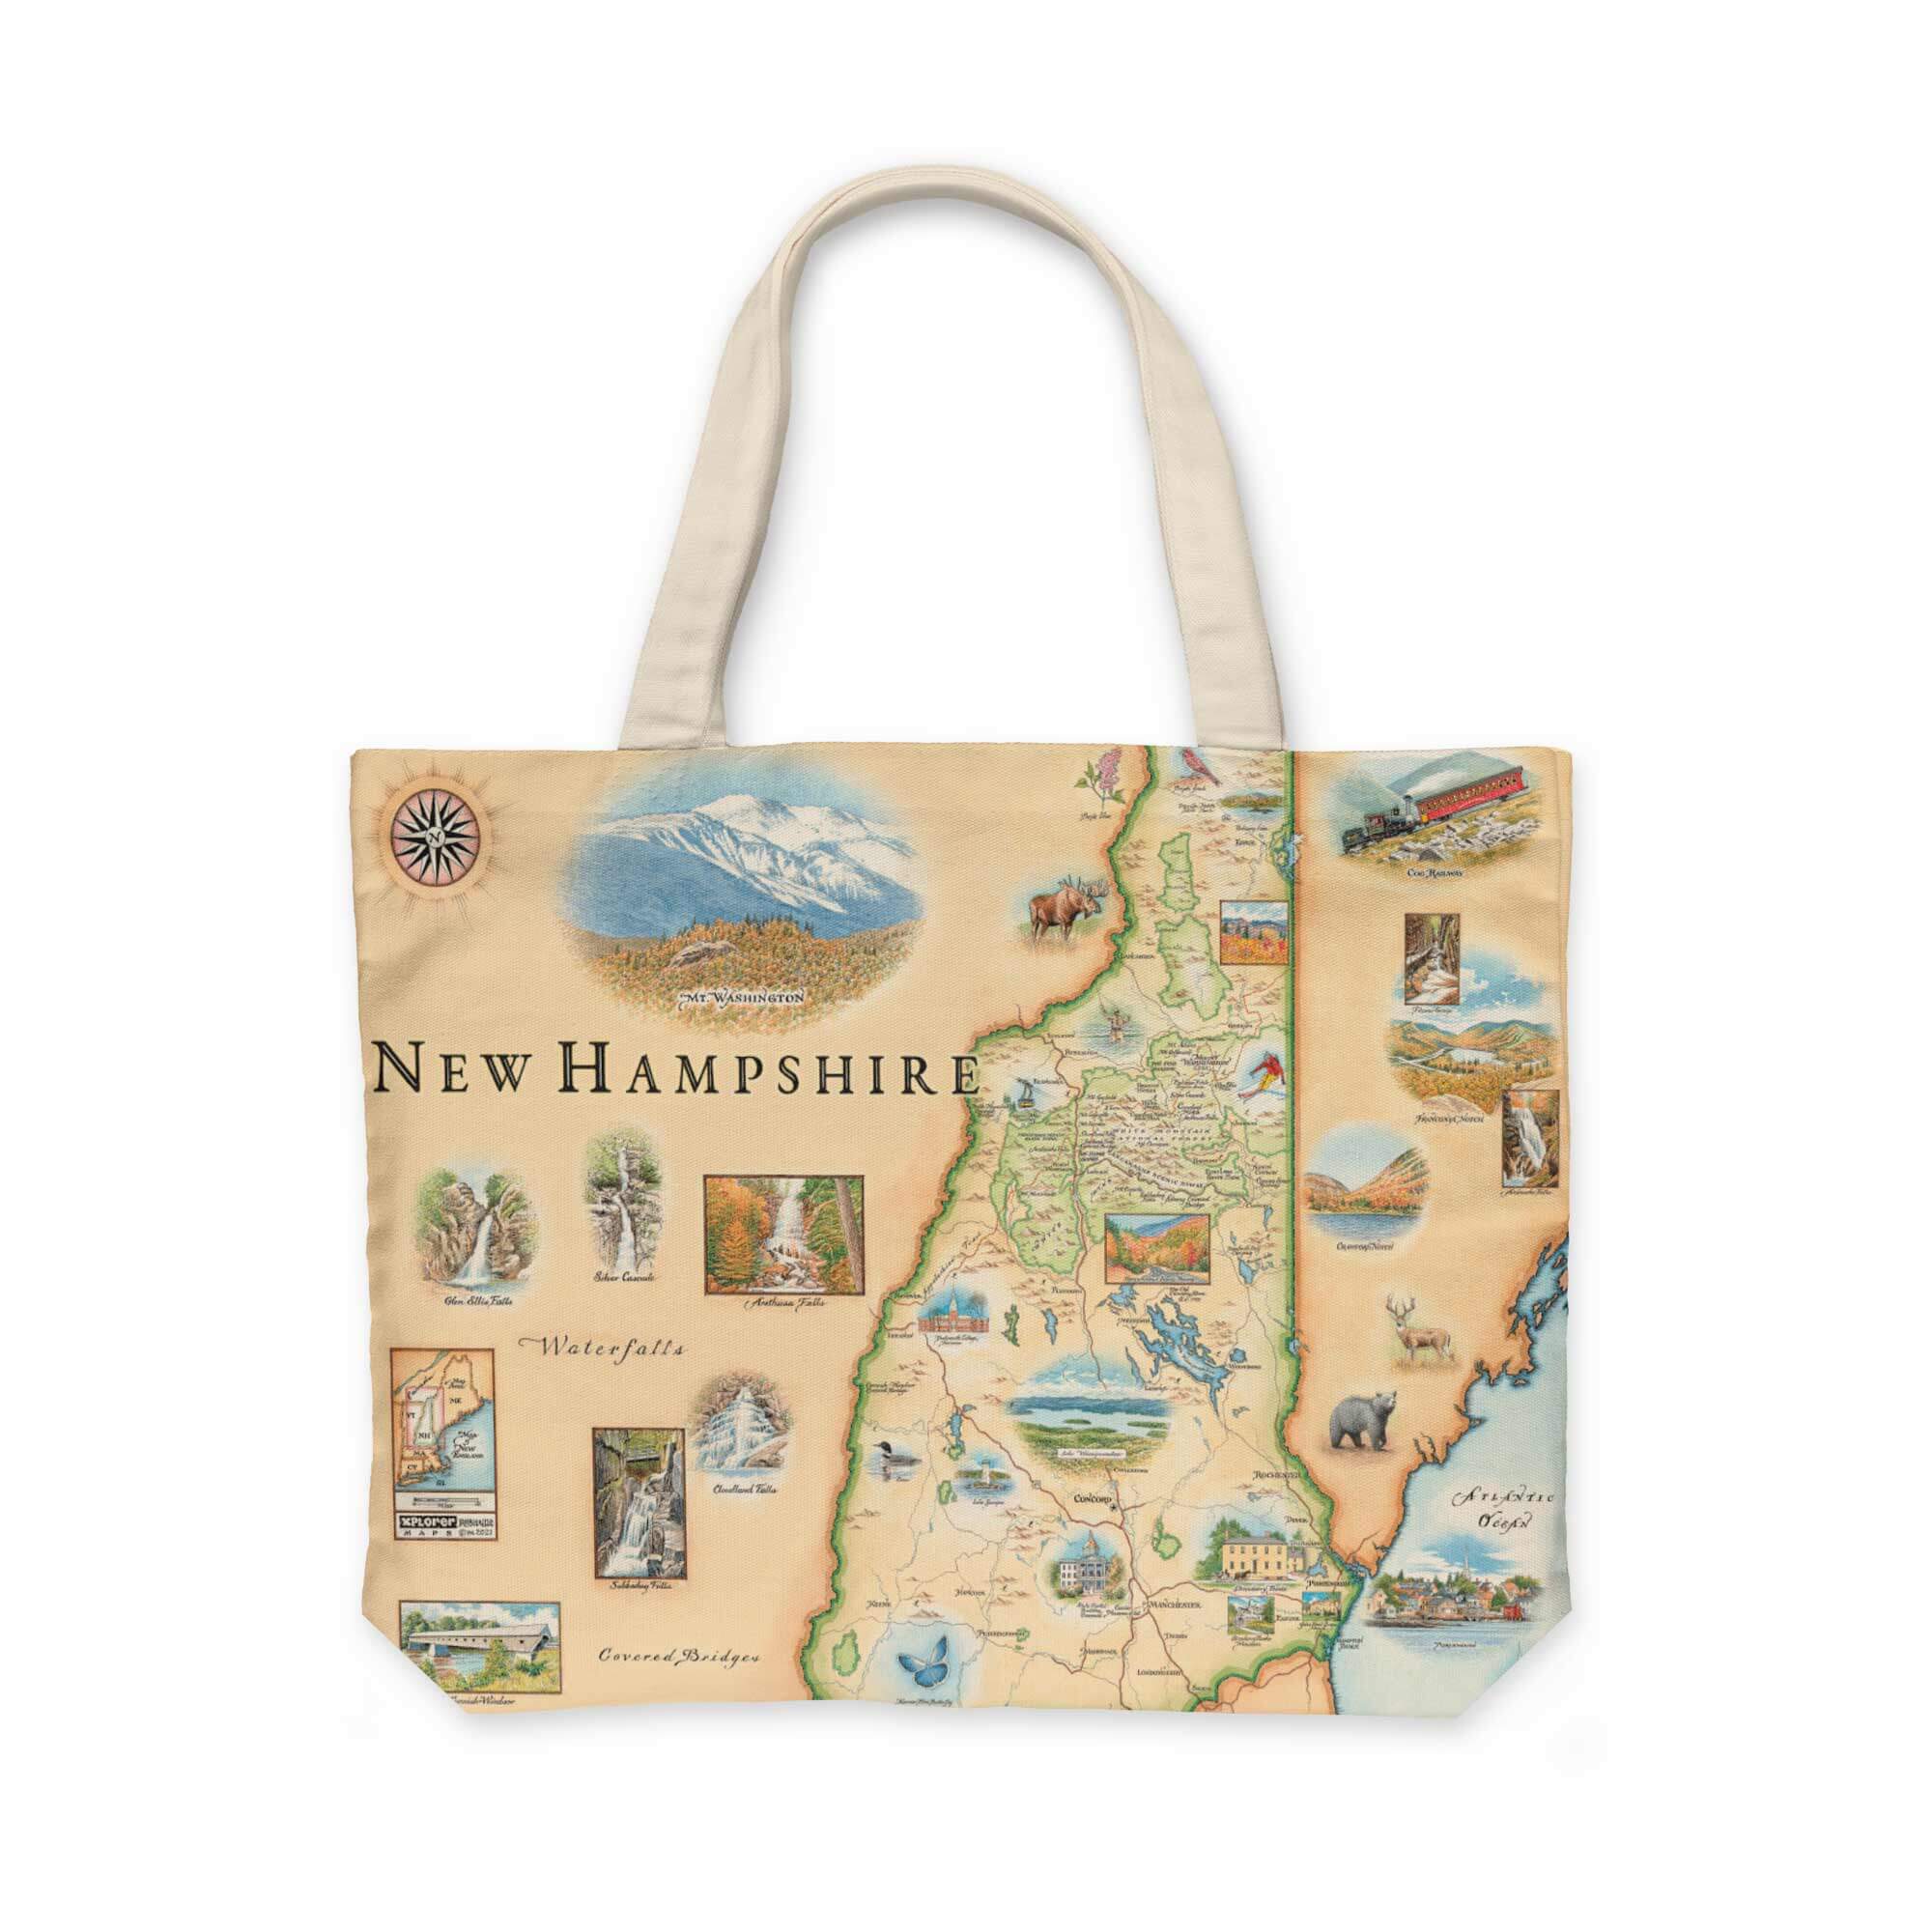  Embrace the spirit of New Hampshire with this spacious canvas tote bag. Adorned with illustrations of iconic attractions like the Cog Railway, majestic wildlife such as bears, deer, and moose, picturesque waterfalls, and the towering Mt. Washington, it showcases the state's scenic landscapes and rustic charm. Perfect for everyday use or as a stylish carryall, it's the ideal accessory for expressing your love for the Granite State.